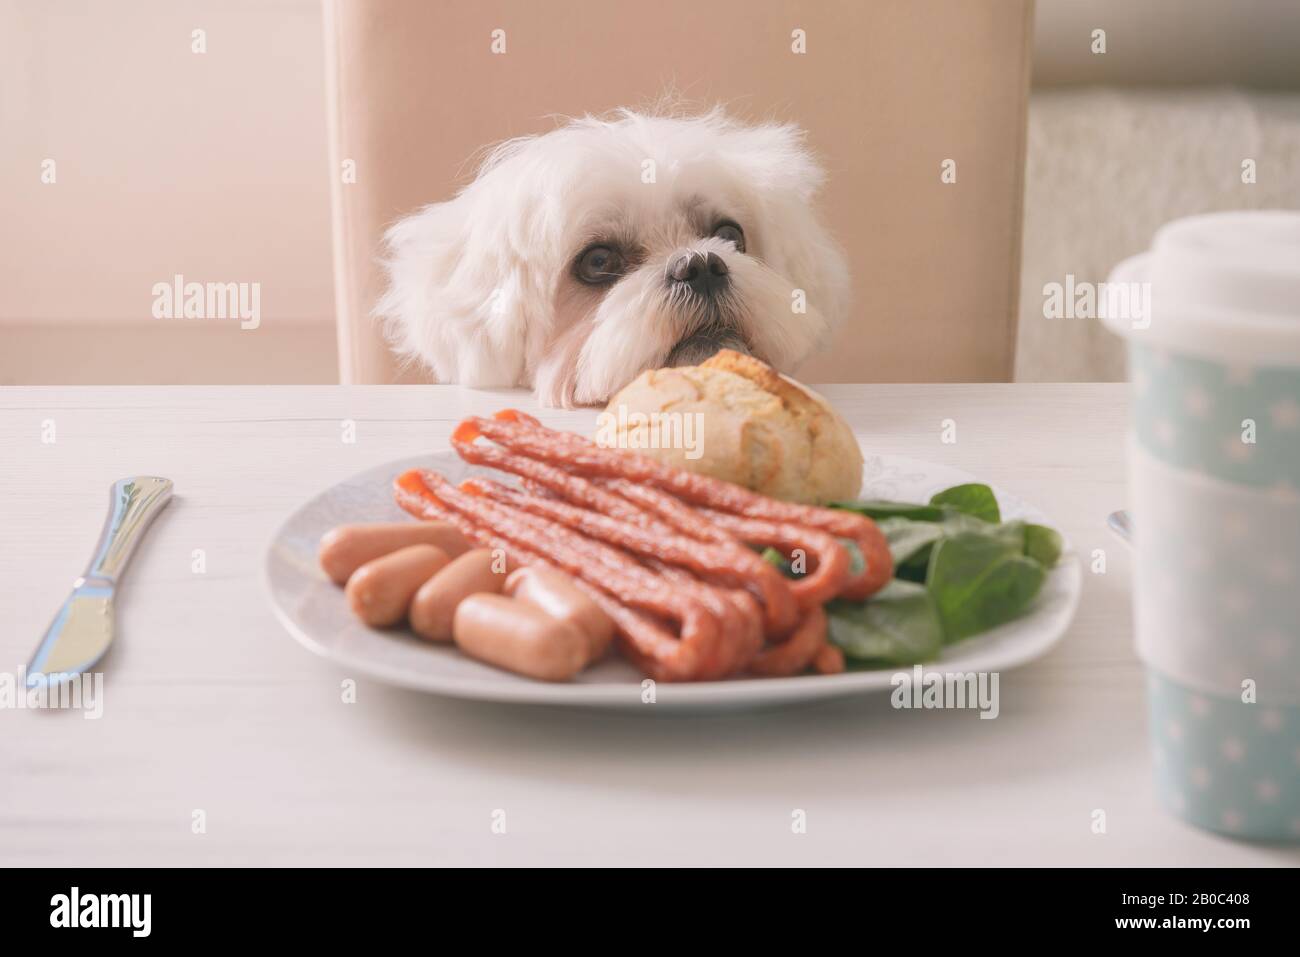 Cute white dog Maltese sitting on a chair at the table and begging for food like sausage which is on a plate. Stock Photo